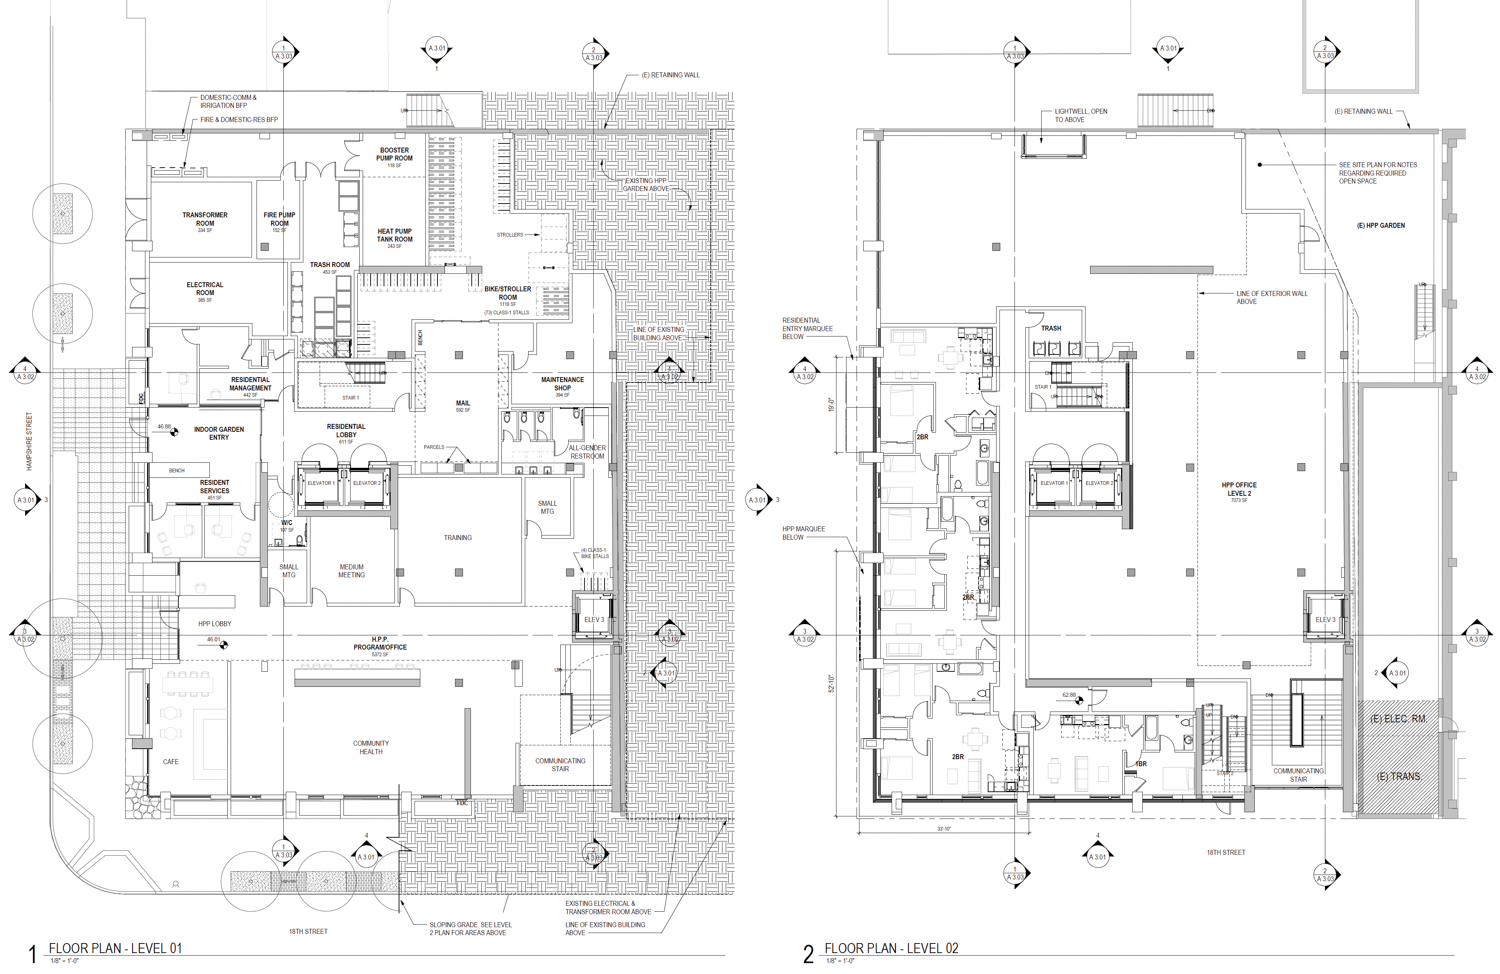 2530 18th Street first and second level floor plans, illustration by Mithun